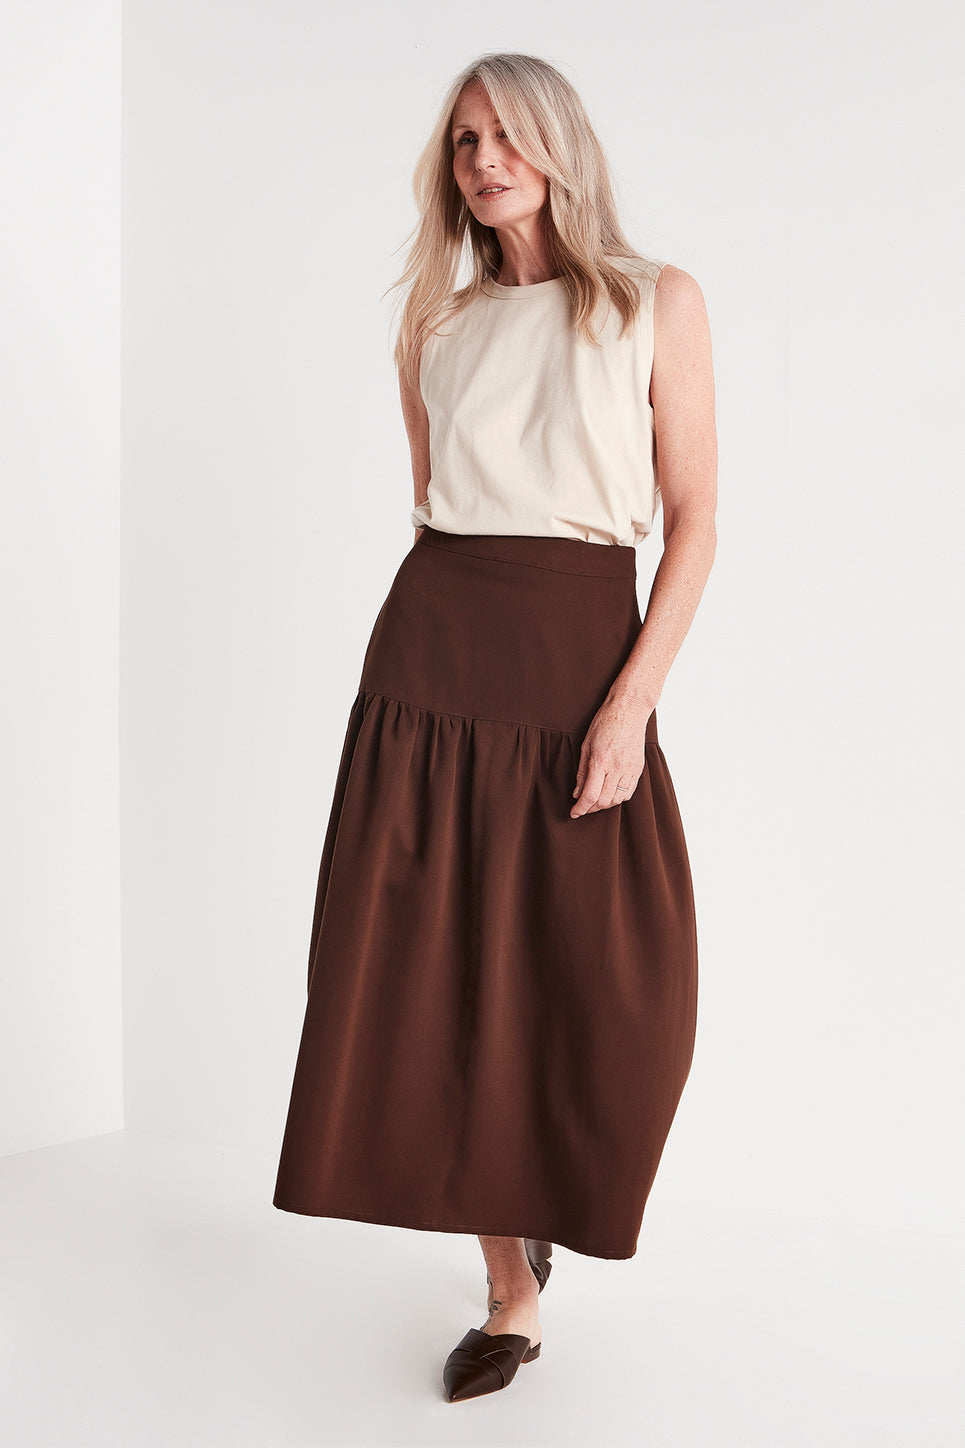 The Madrid Skirt in Chocolate